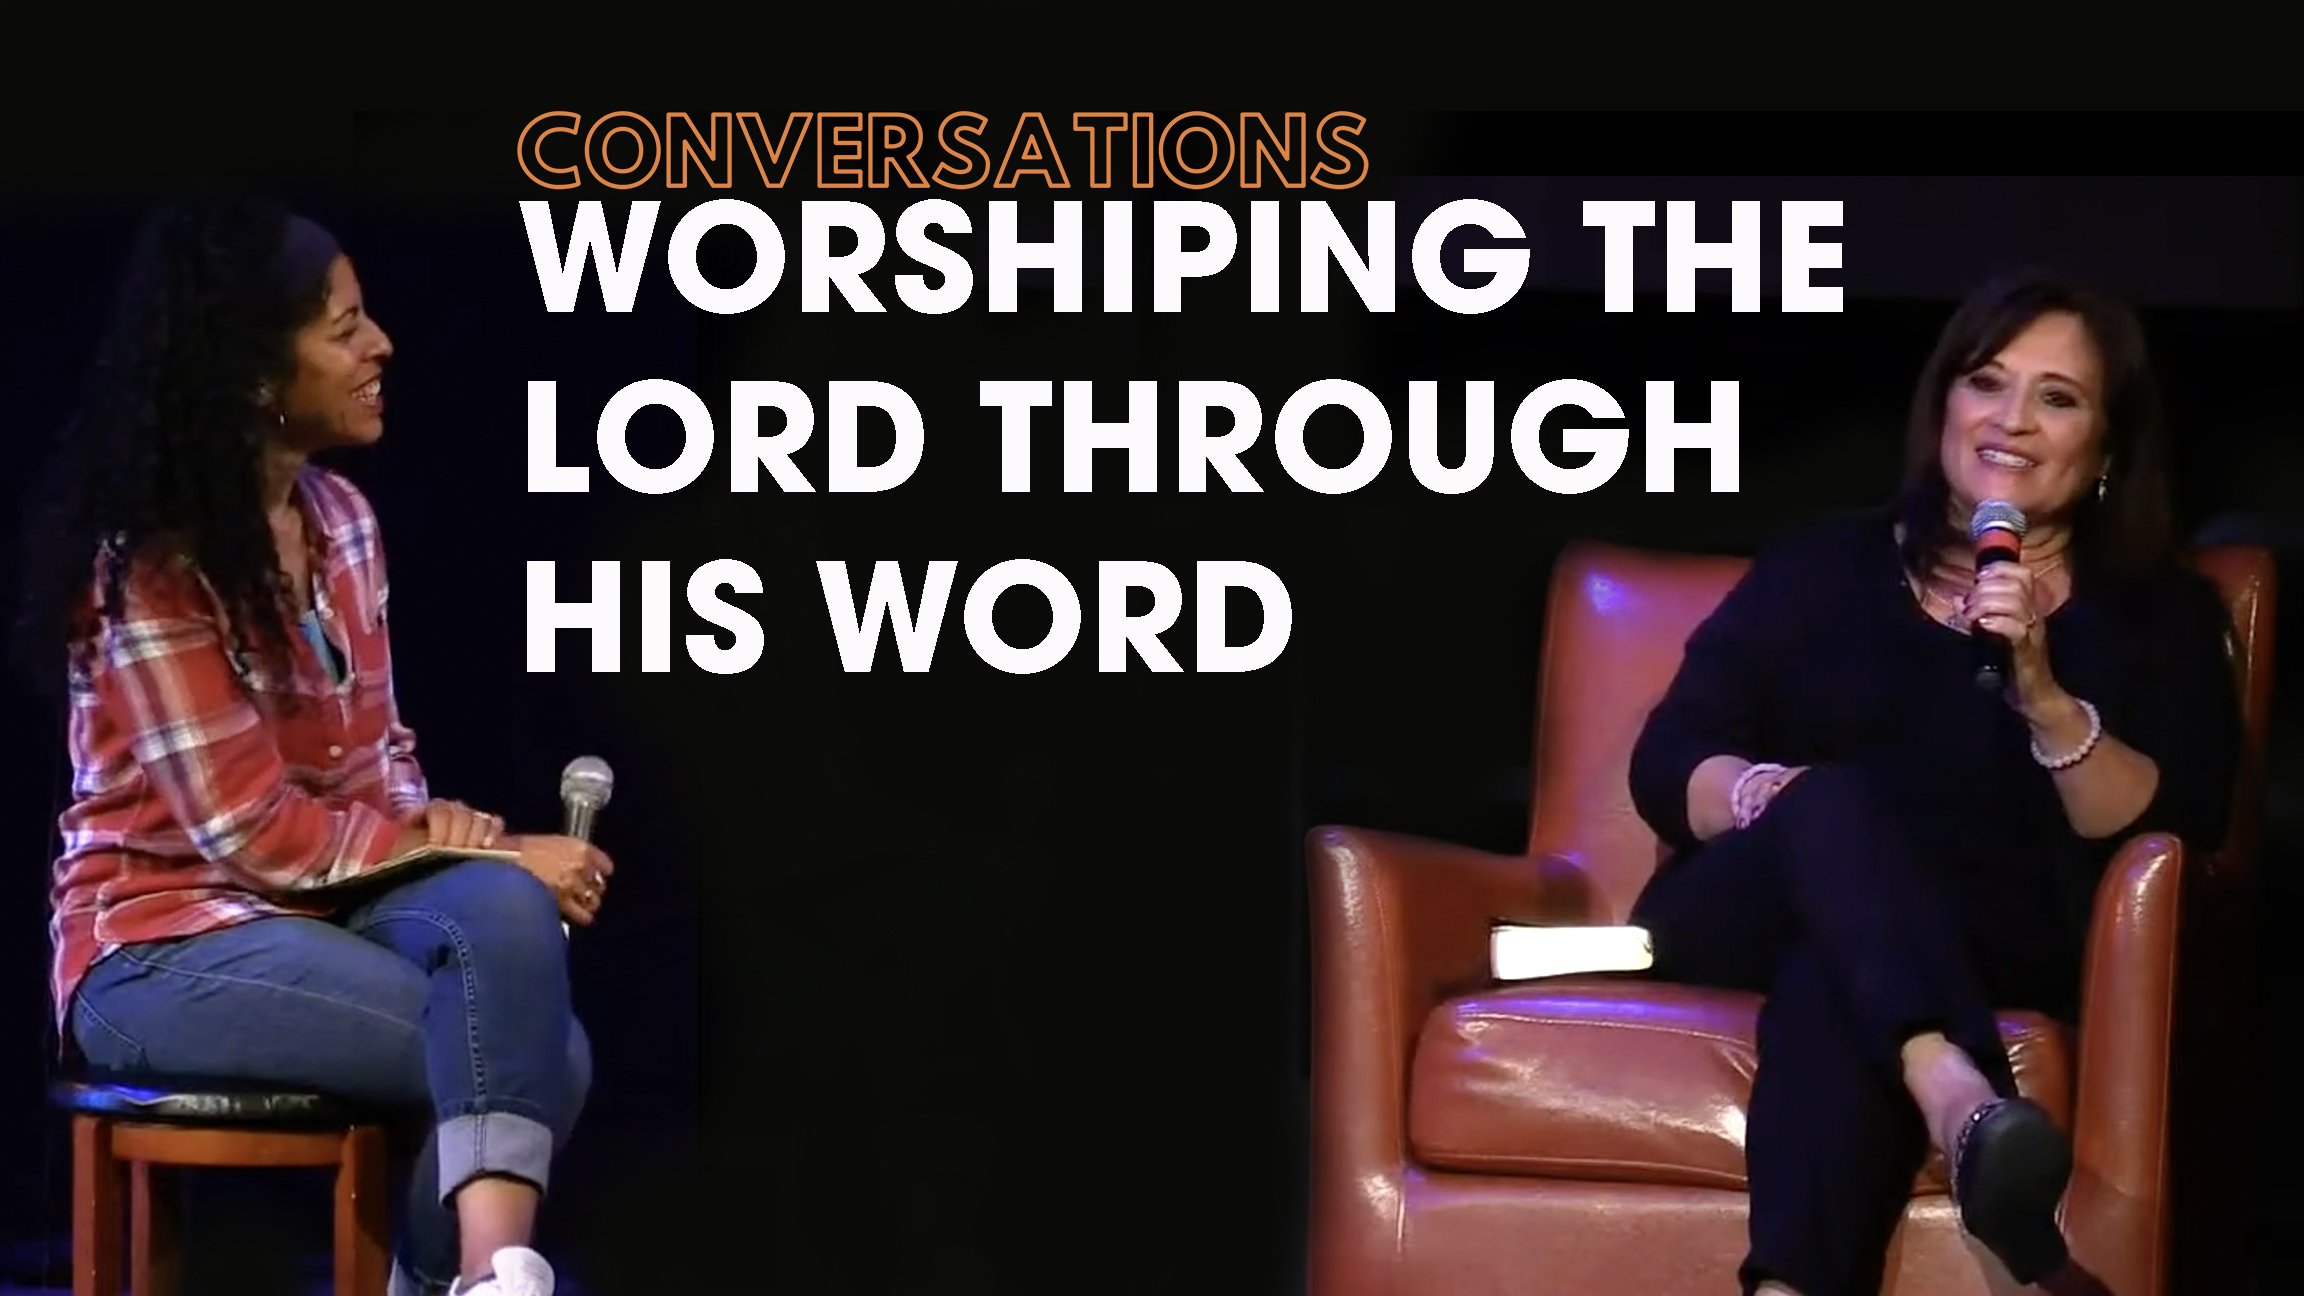 Worshiping The Lord Through His Word – Diana Anderson, Rosie Bates, & Deanna Madrid